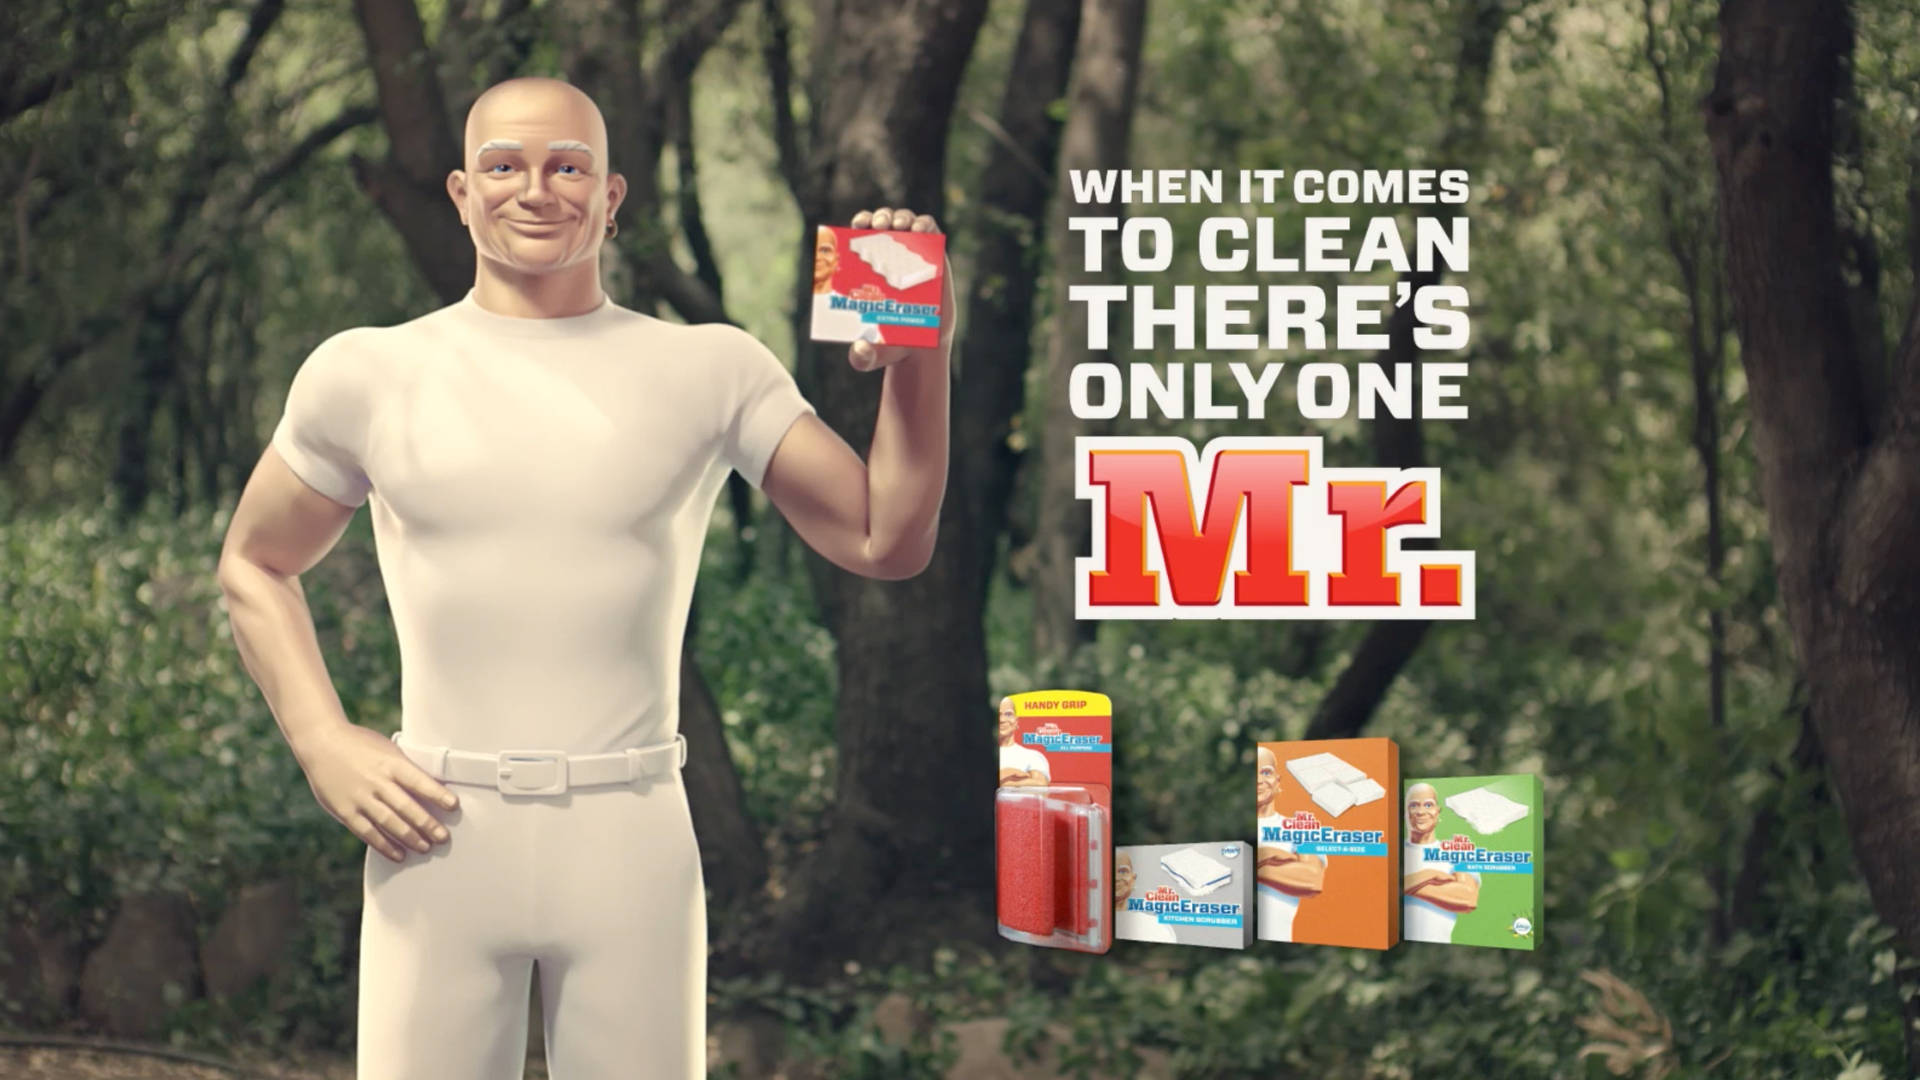 In for round 6, and even Mr. Clean loves the pump! 